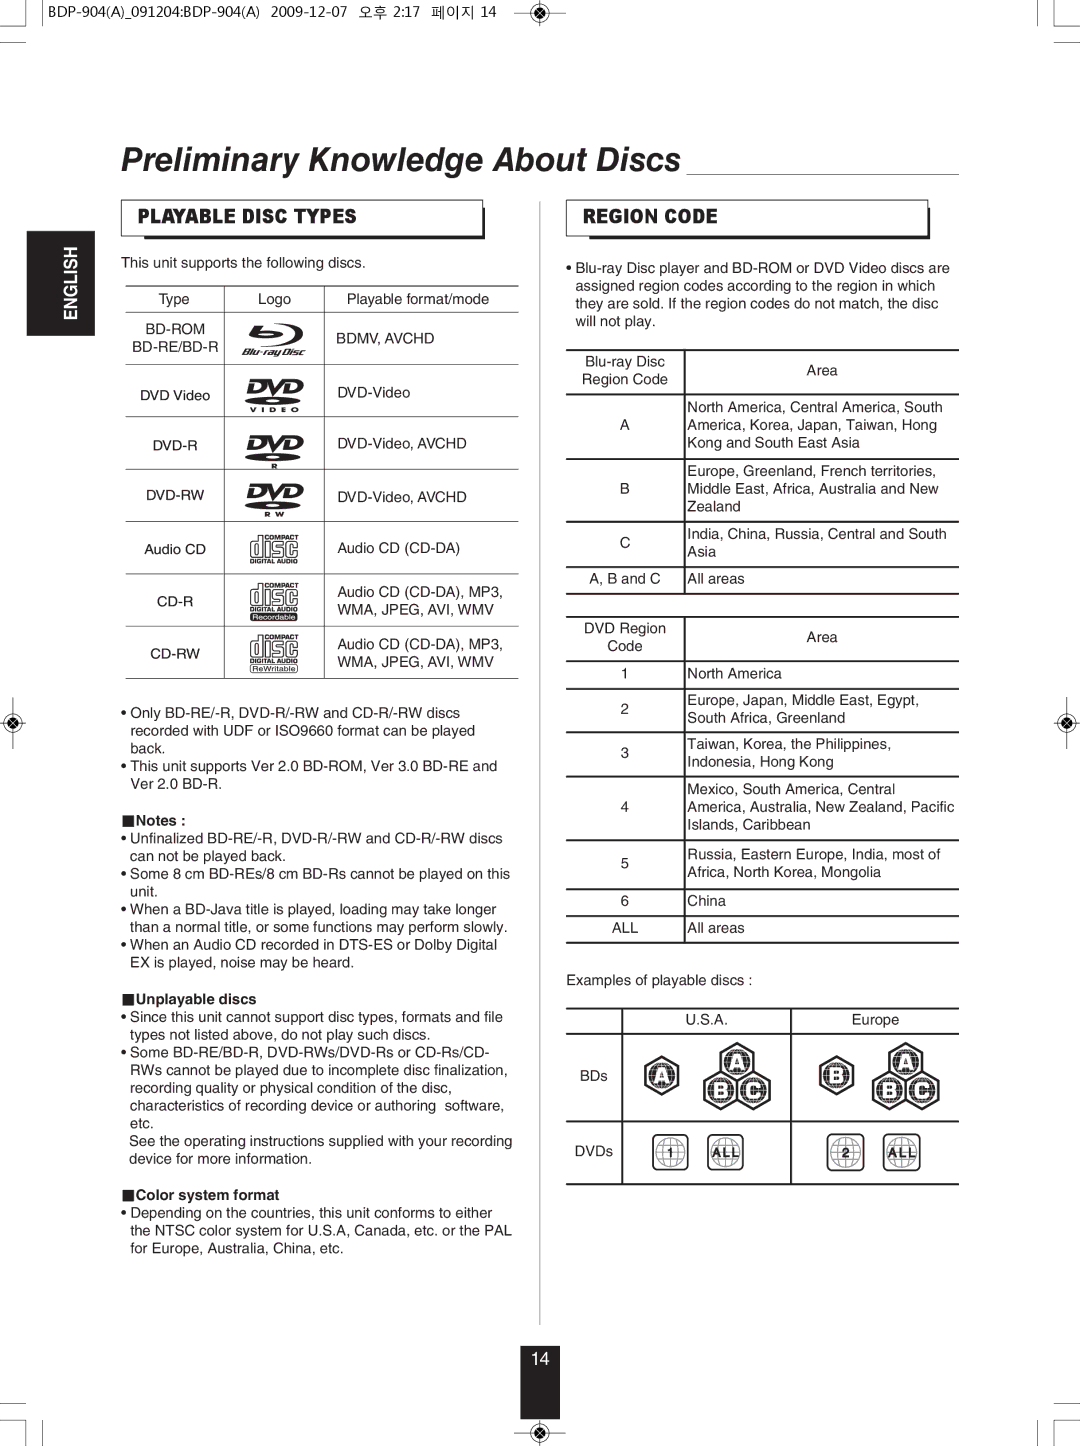 Sherwood BDP-904 manual Preliminary Knowledge About Discs, Playable DISc Types, Region cODE, Unplayable discs 